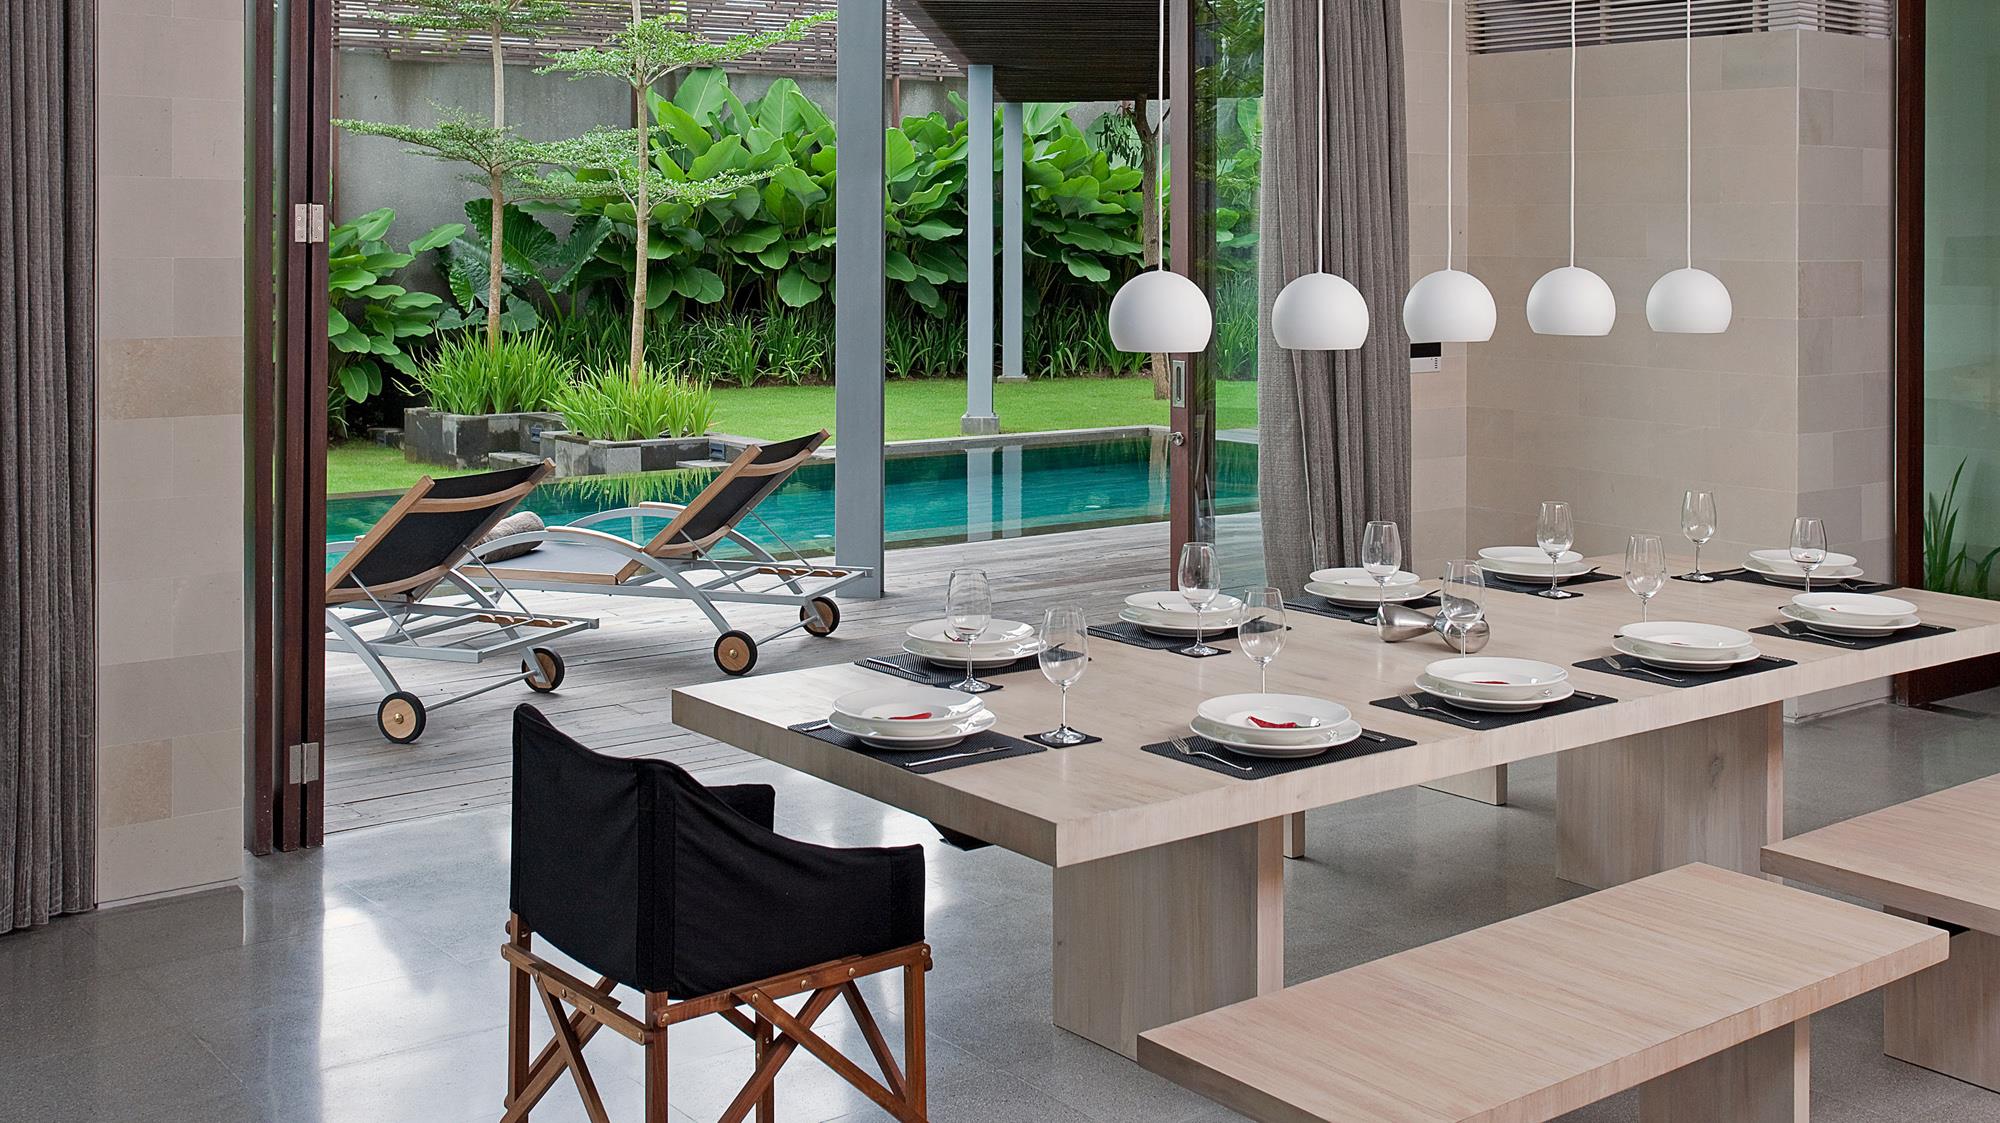 Dining Area with Pool View - Villa Issi - Seminyak, Bali